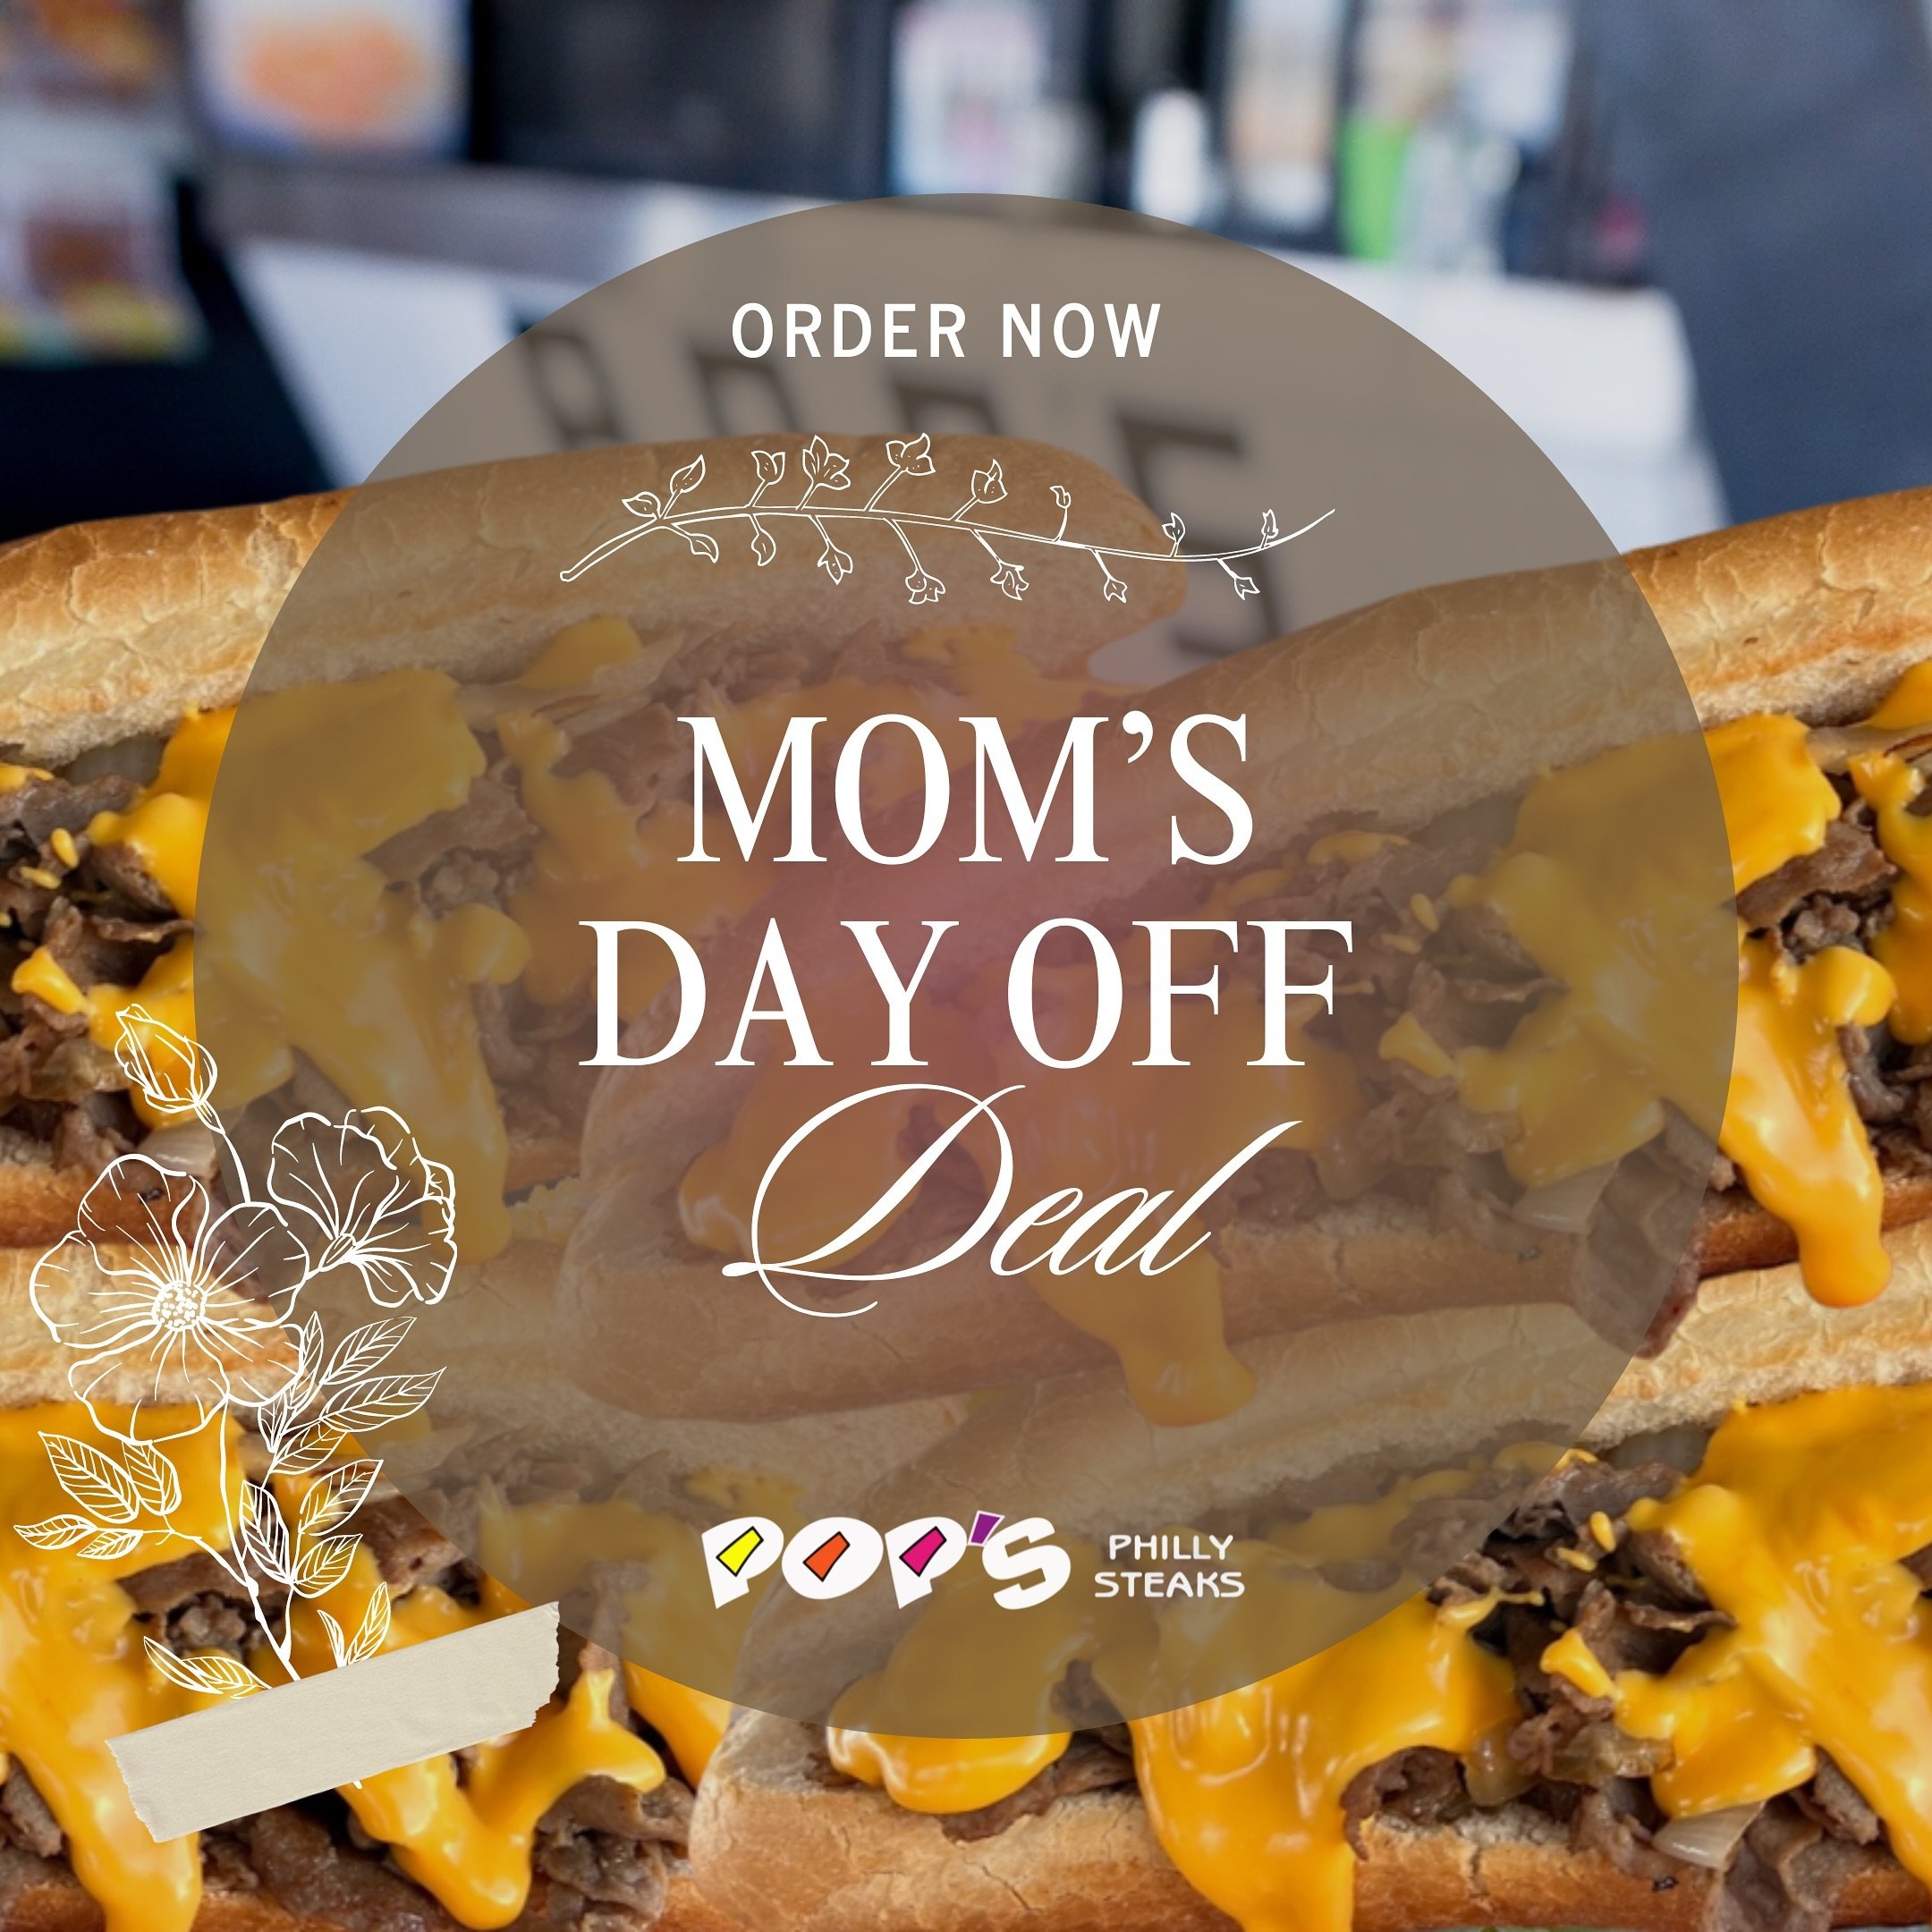 💖 Give mom the day off from cooking and cleaning the dishes! 

Our Mom&rsquo;s Day Off Deal comes with 4 cheesesteaks with your choice of chicken or steak, &ldquo;wit&rdquo; or &ldquo;witout&rdquo; onions, topped with your choice of cheese, served o